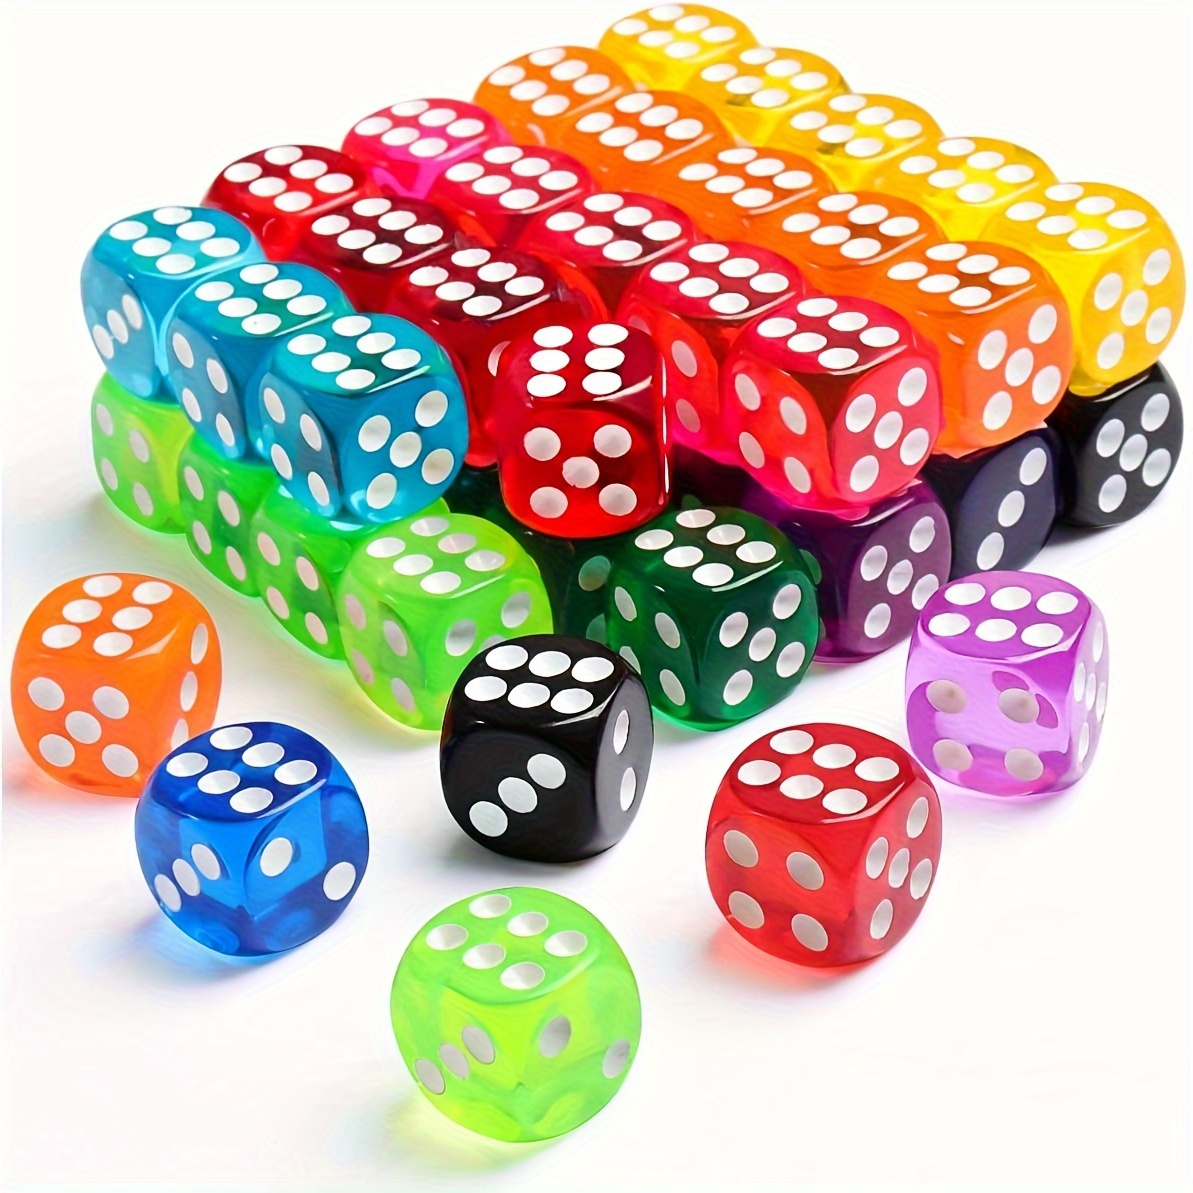 

55-piece Vibrant 14mm Dice Set - Perfect For Board Games & Educational Math Activities, Ideal For Teens & Adults